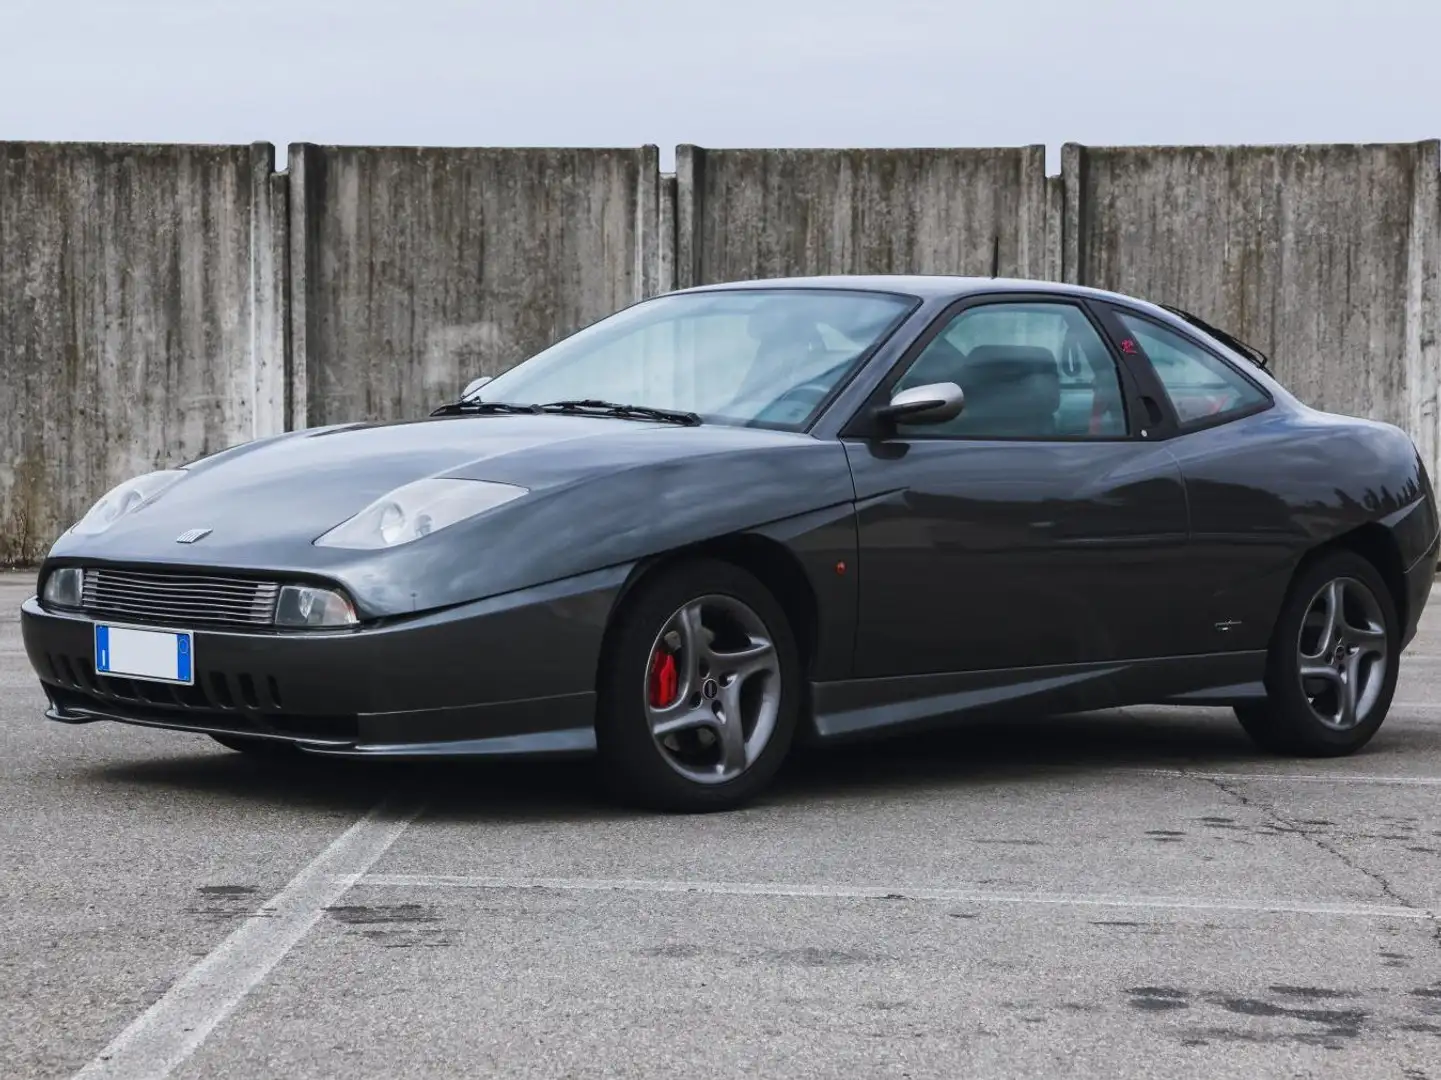 Fiat Coupe Coupe 2.0 20v turbo Limited Edition Grijs - 1